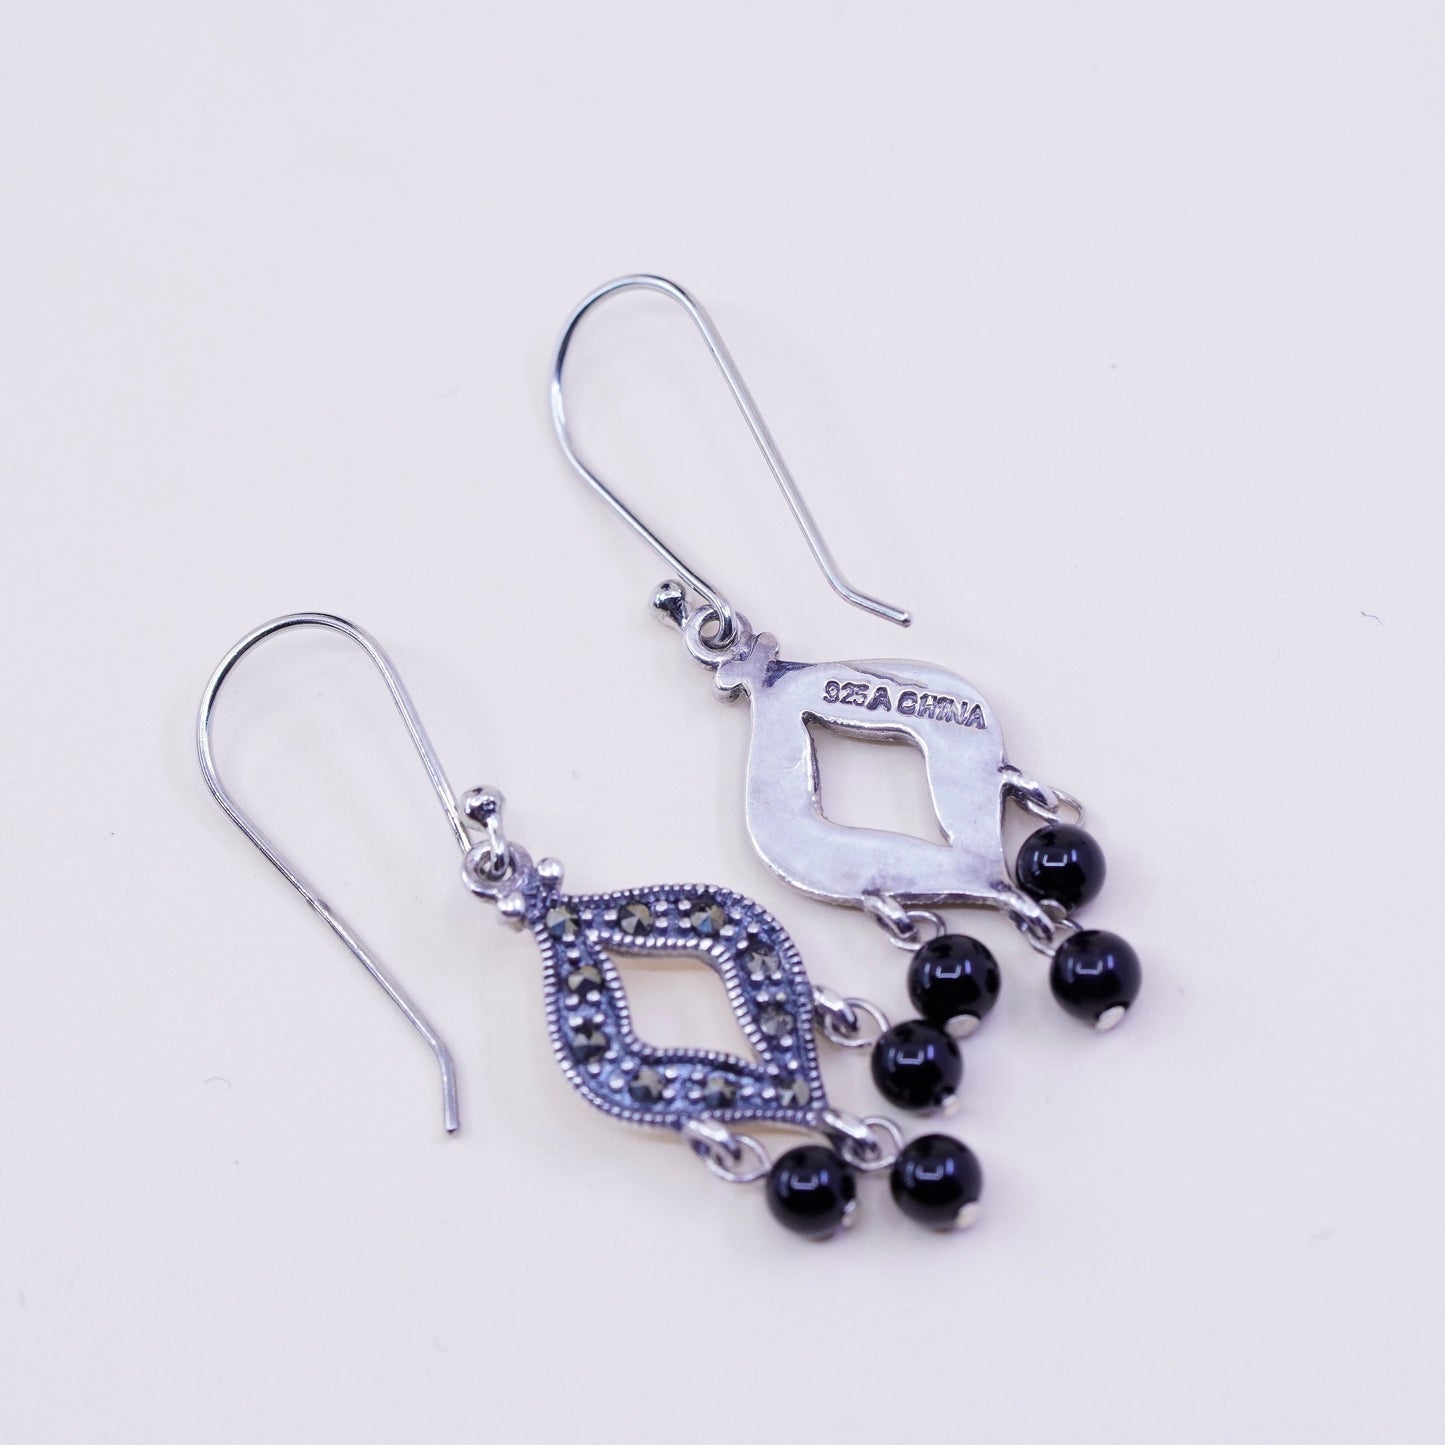 Vintage Sterling silver handmade earrings, 925 drops with obsidian and marcasite, stamped 925 China